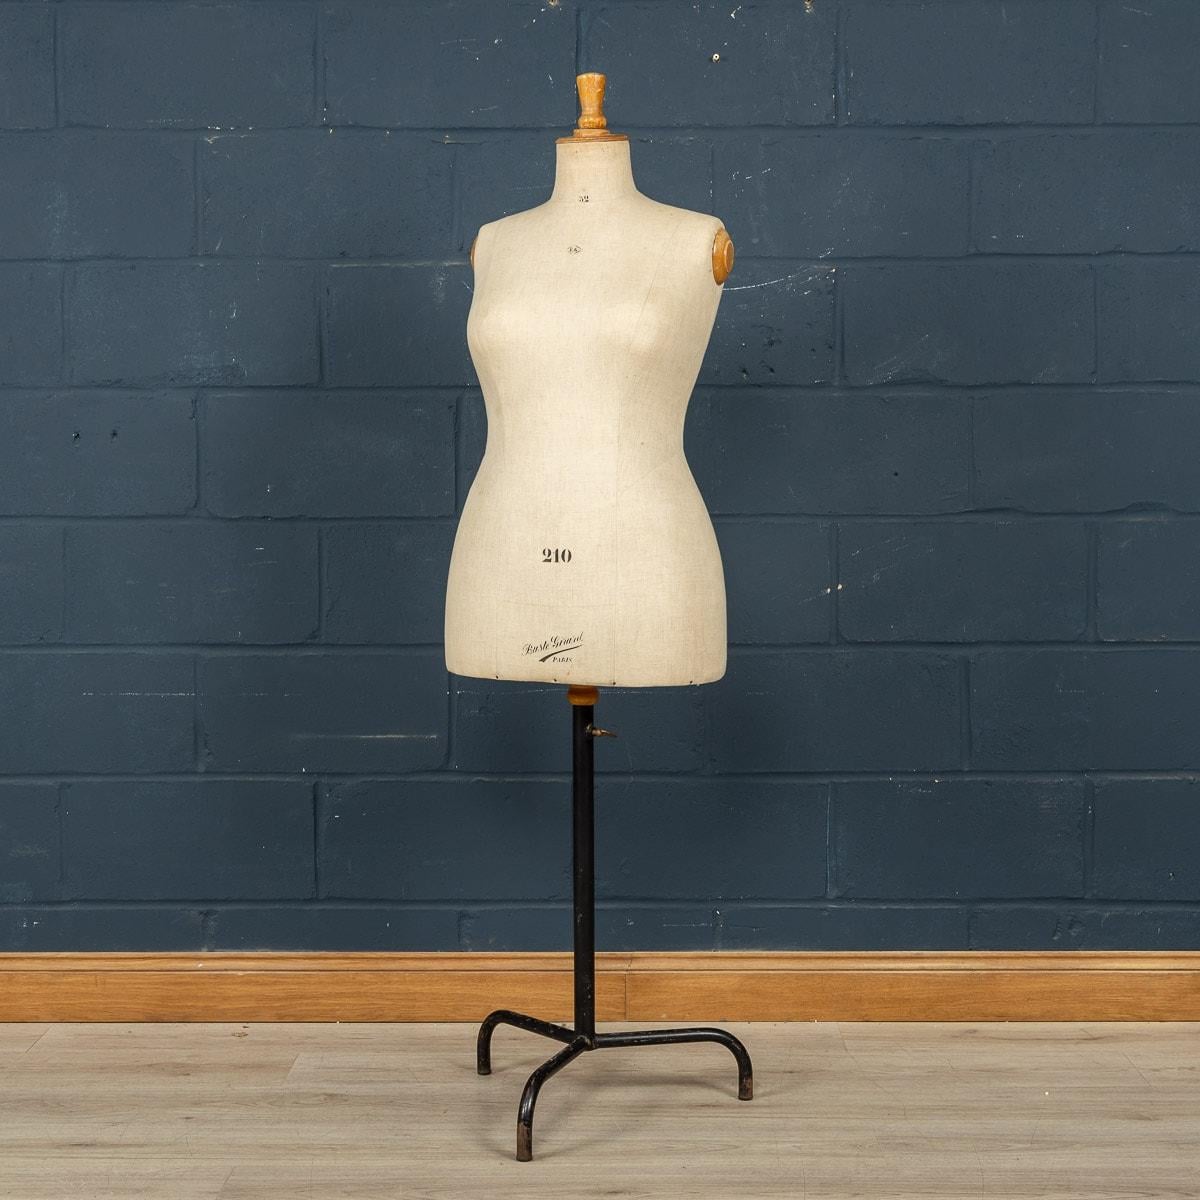 A lovely shop display mannequin dating to the early part of the last century. This quality vintage French mannequin or Taylor's dummy dates from around the 1920s era and has a slack steel base with the quality makers stamp “Buste Girard“ at the